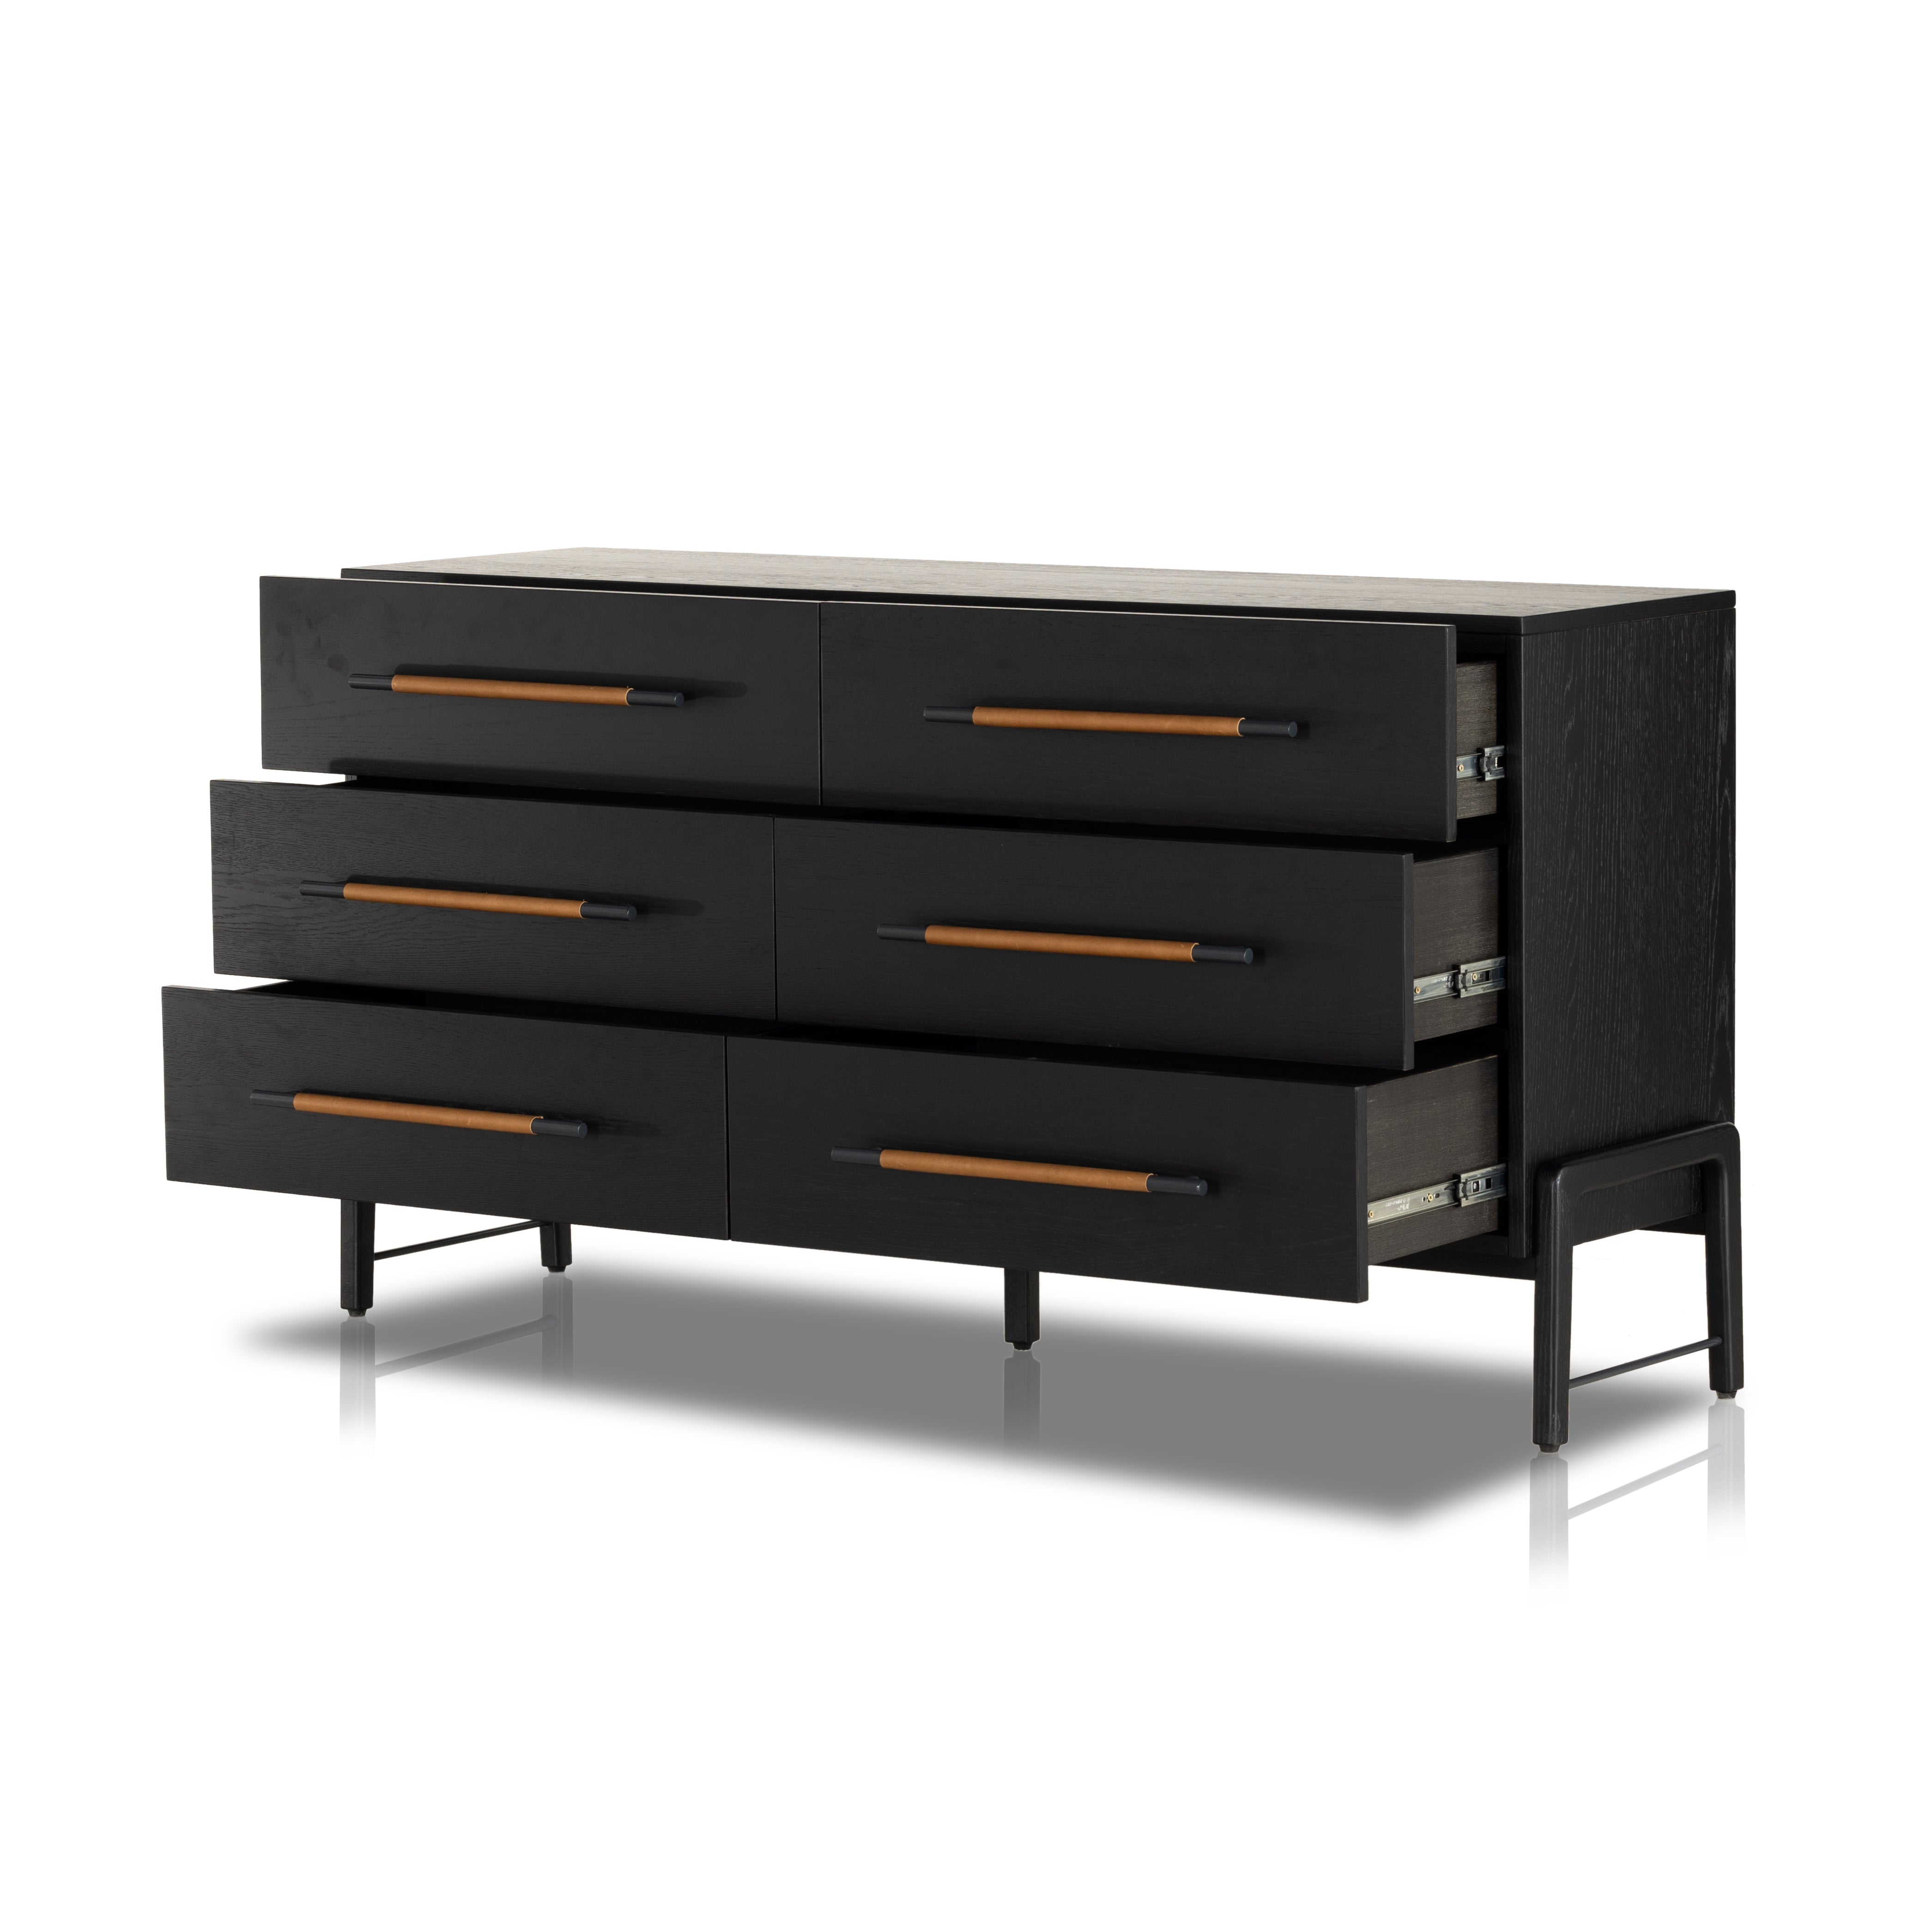 The ebony oak of this Rosedale 6 Drawer Dresser brings a moody, darkness to any room. With six spacious drawers and iron hardware wrapped in a gorgeous, tan leather, this is a functional and beautiful piece to add to your bedroom or other area.  Amethyst Home provides interior design, new home construction design consulting, vintage area rugs, and lighting in the Miami metro area.